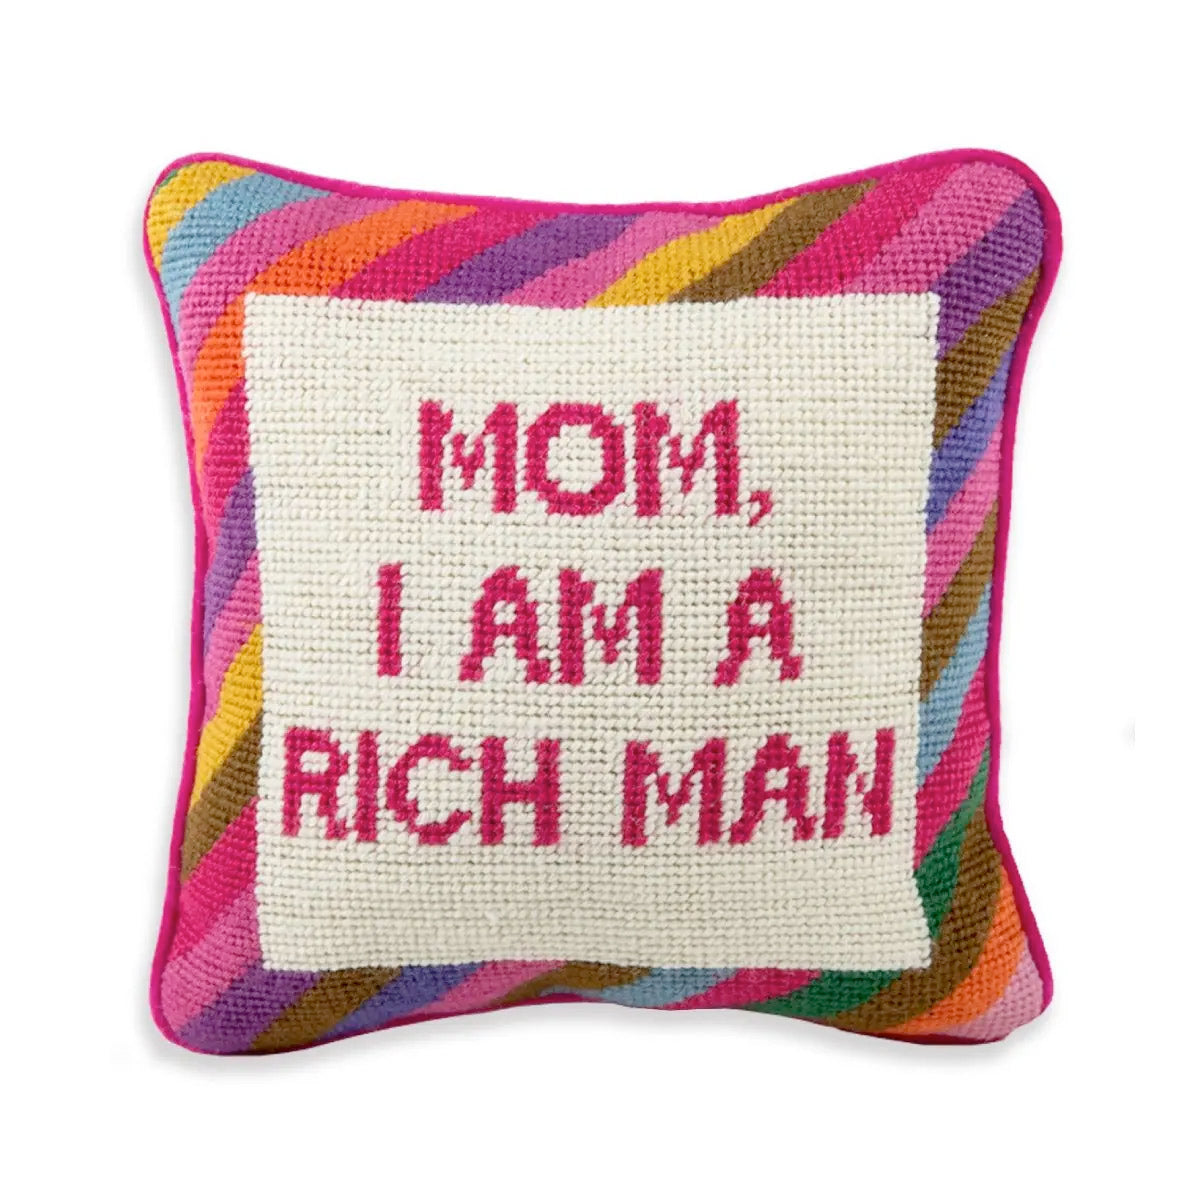 Cher Knows Best Needlepoint Pillow